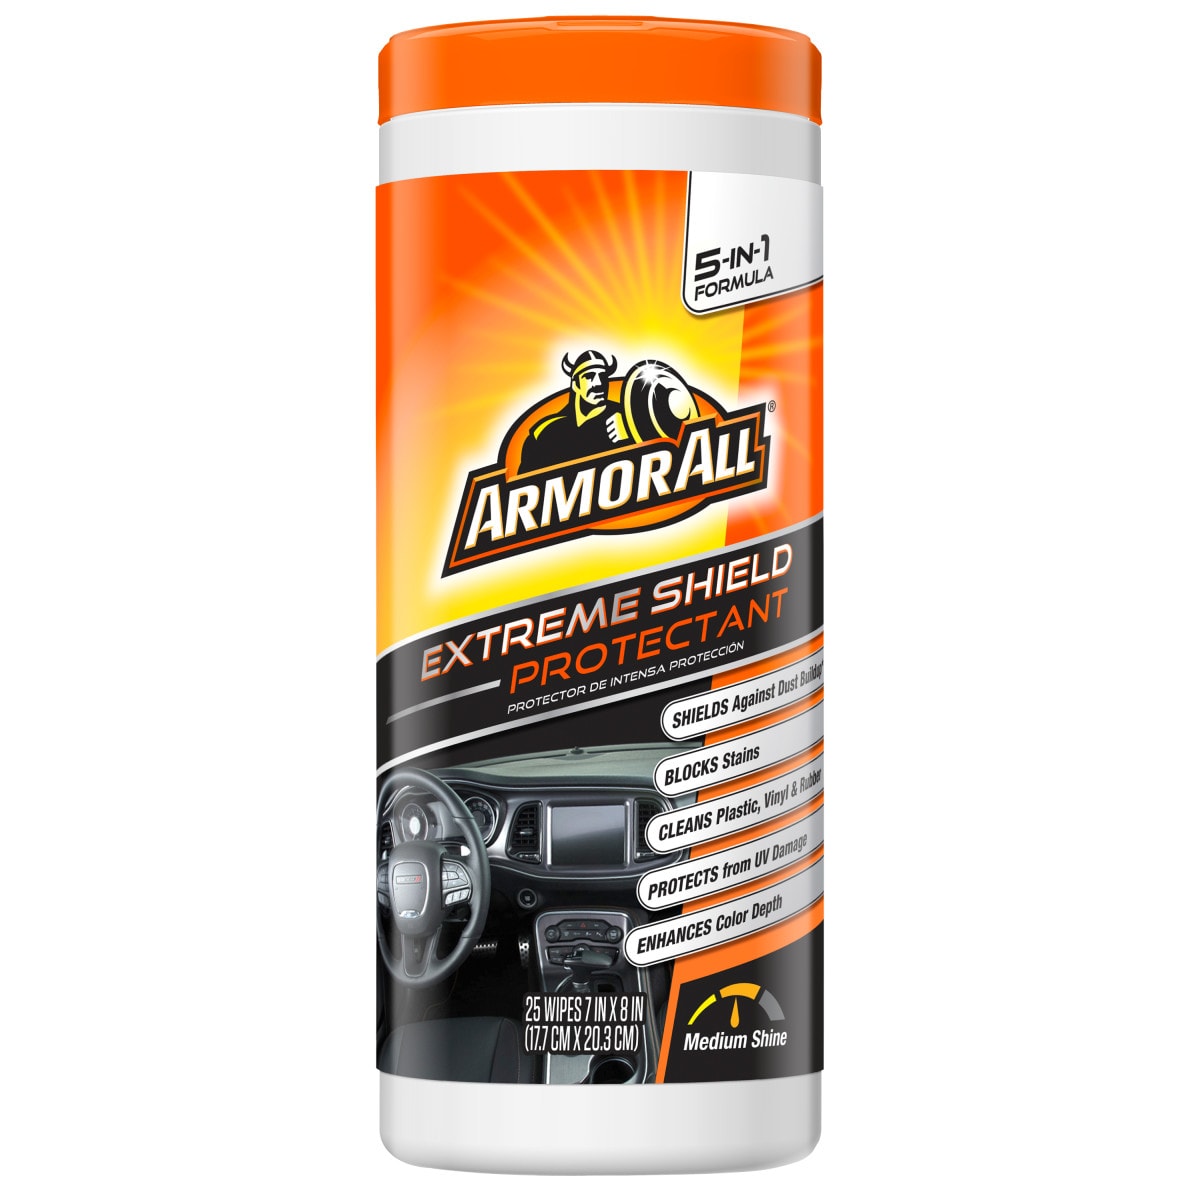 Streetwise Security Products Can Safe Armor All Auto Cleaning Wipes